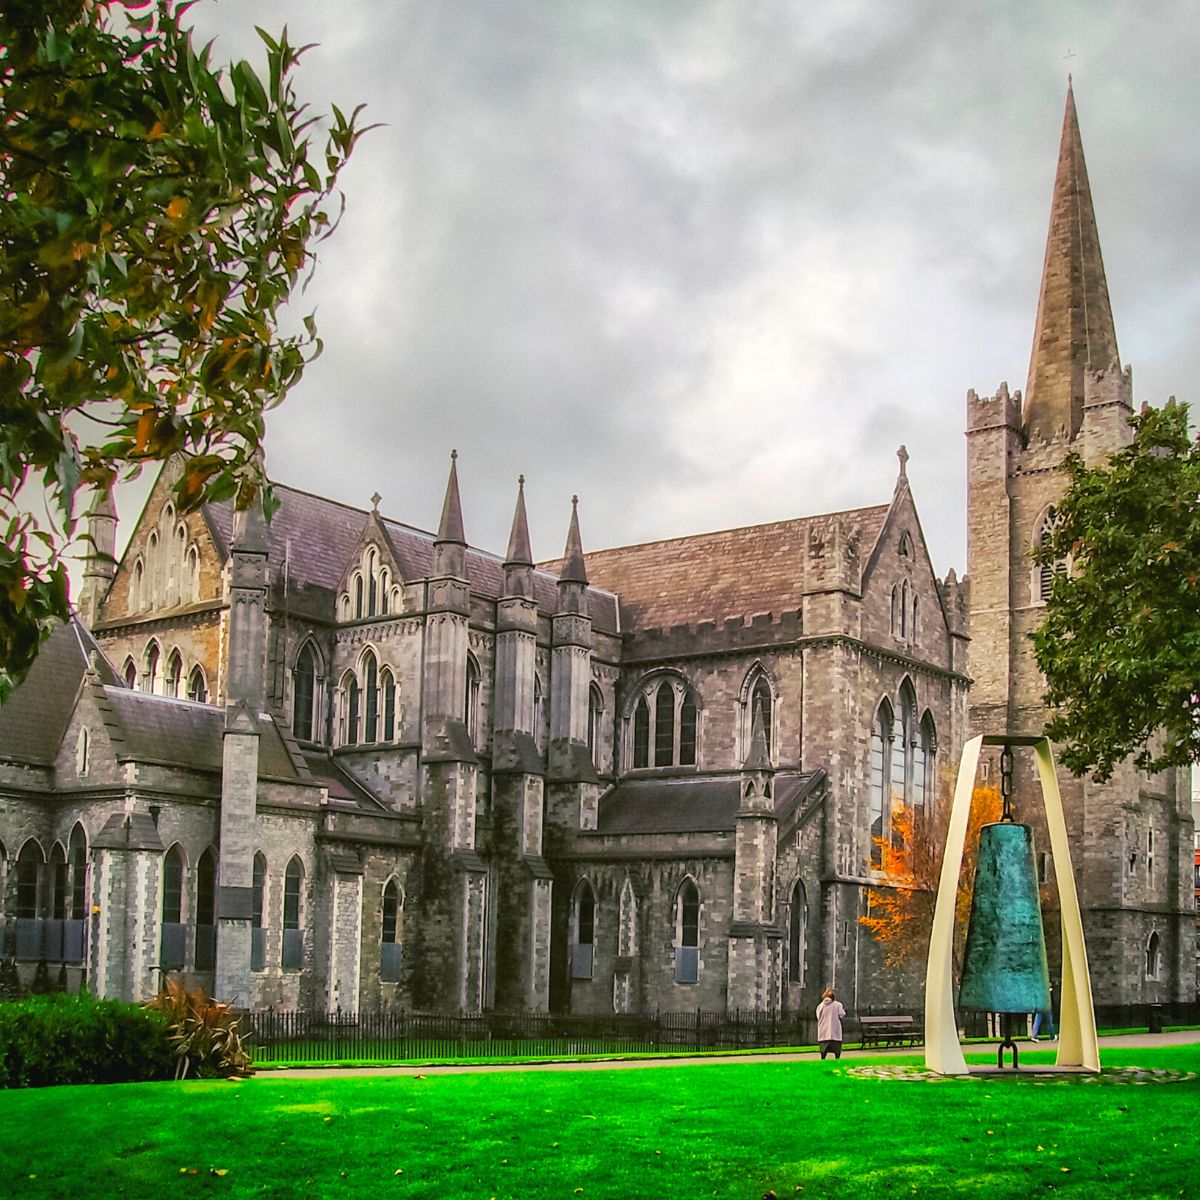 The outside of St. Patrick's Cathedral and a green lawn.